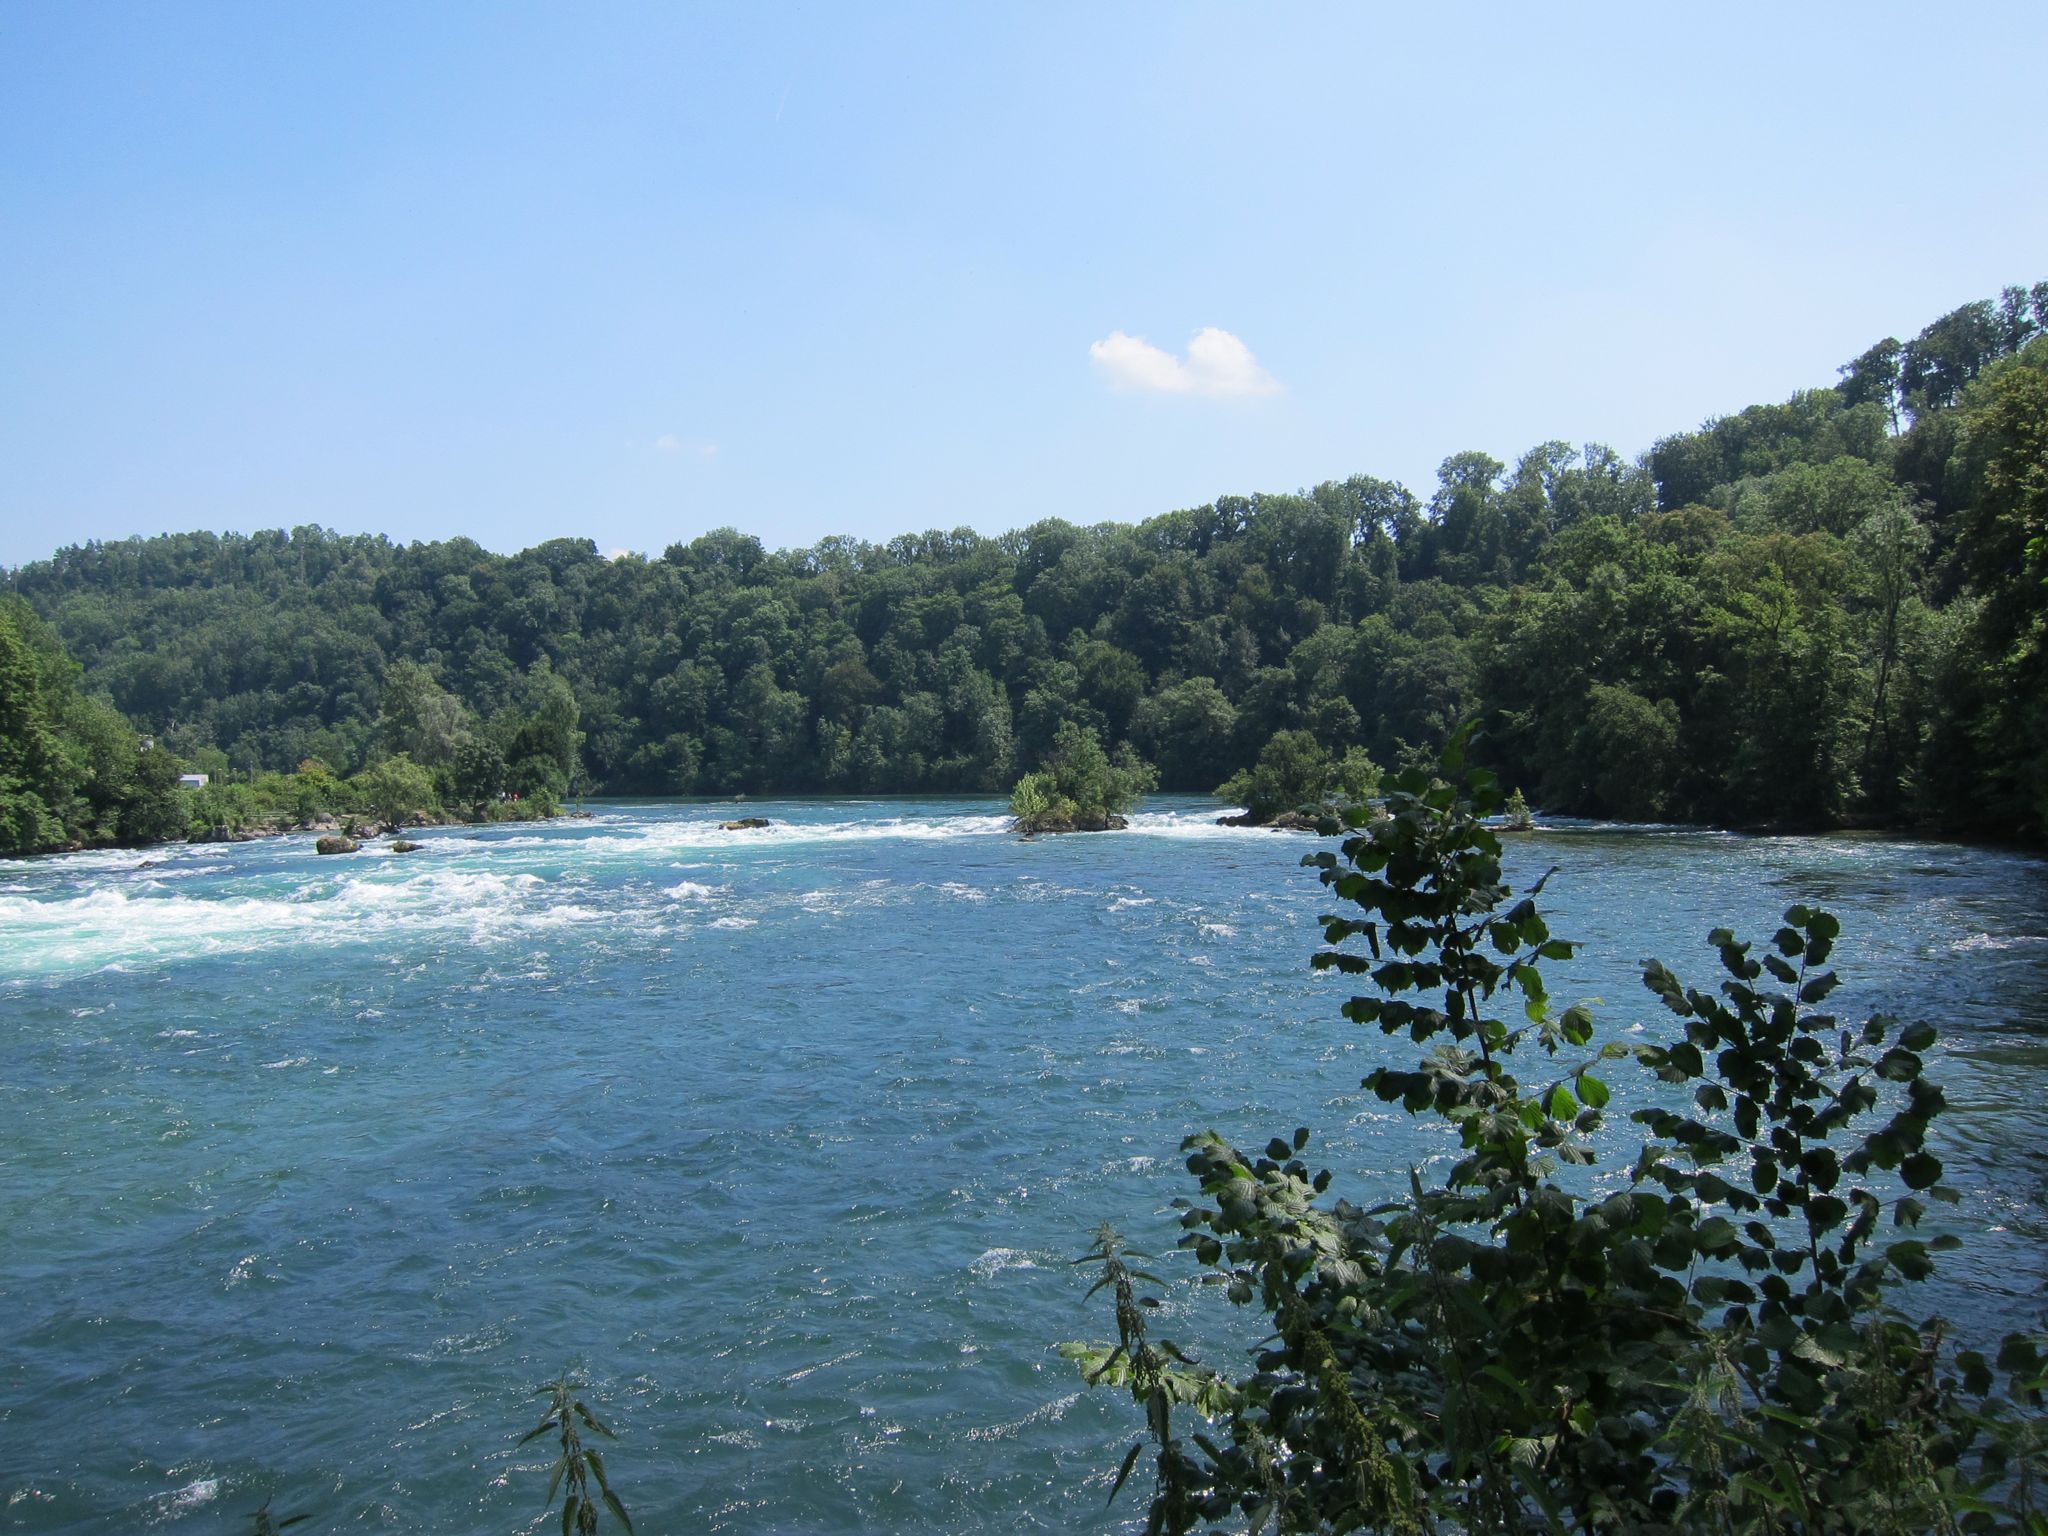 Photo 13 of 22 from the album Rheinfall.